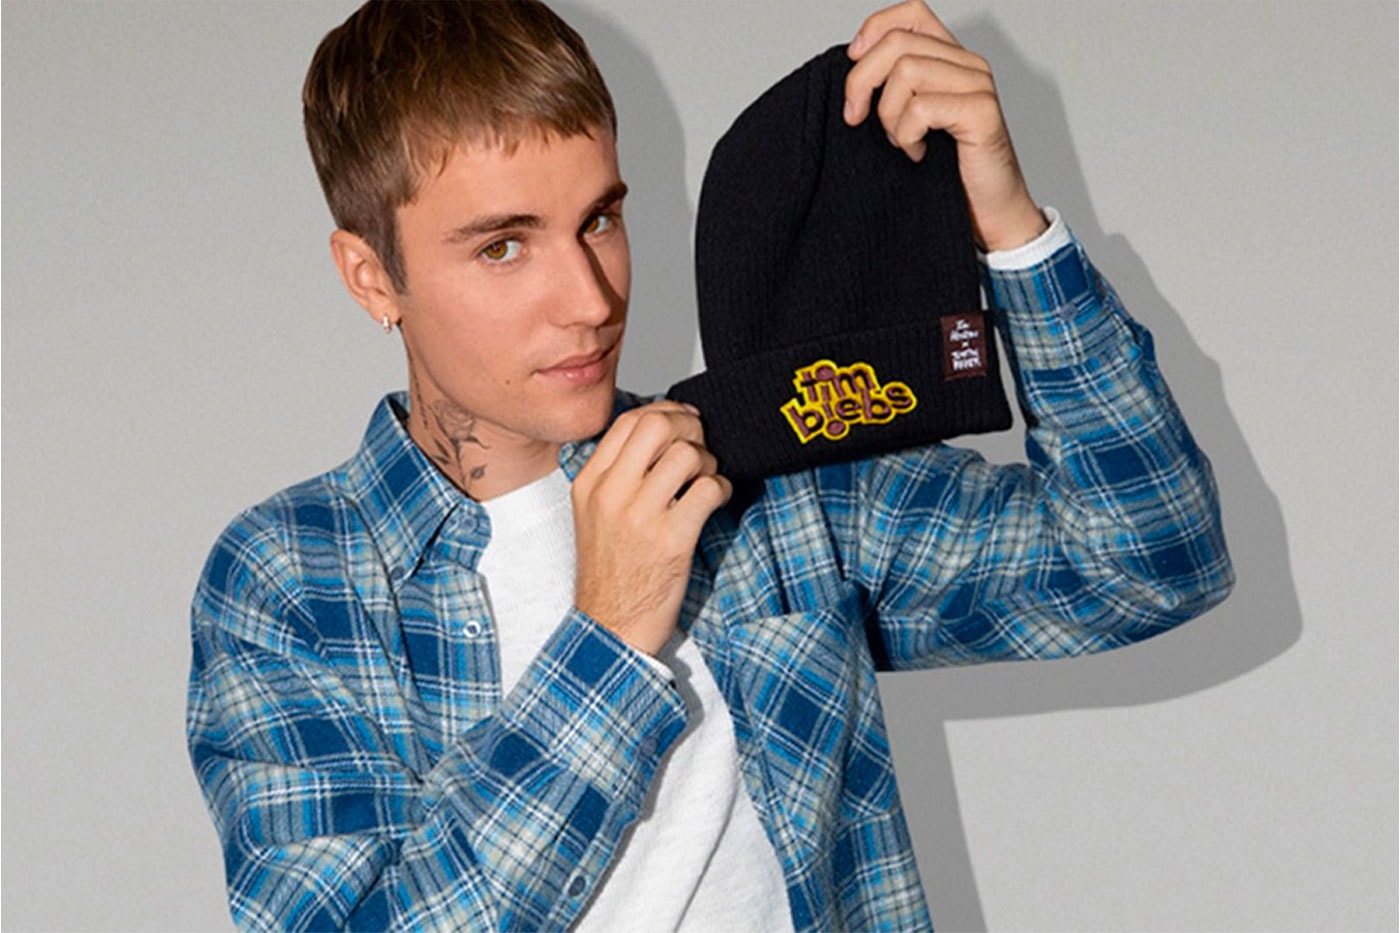 Justin Bieber x Tim Hortons Merch Is Officially Available Nationwide singer canada coffee house timbits timbiebs merchandise u.s. us singer pop artist 